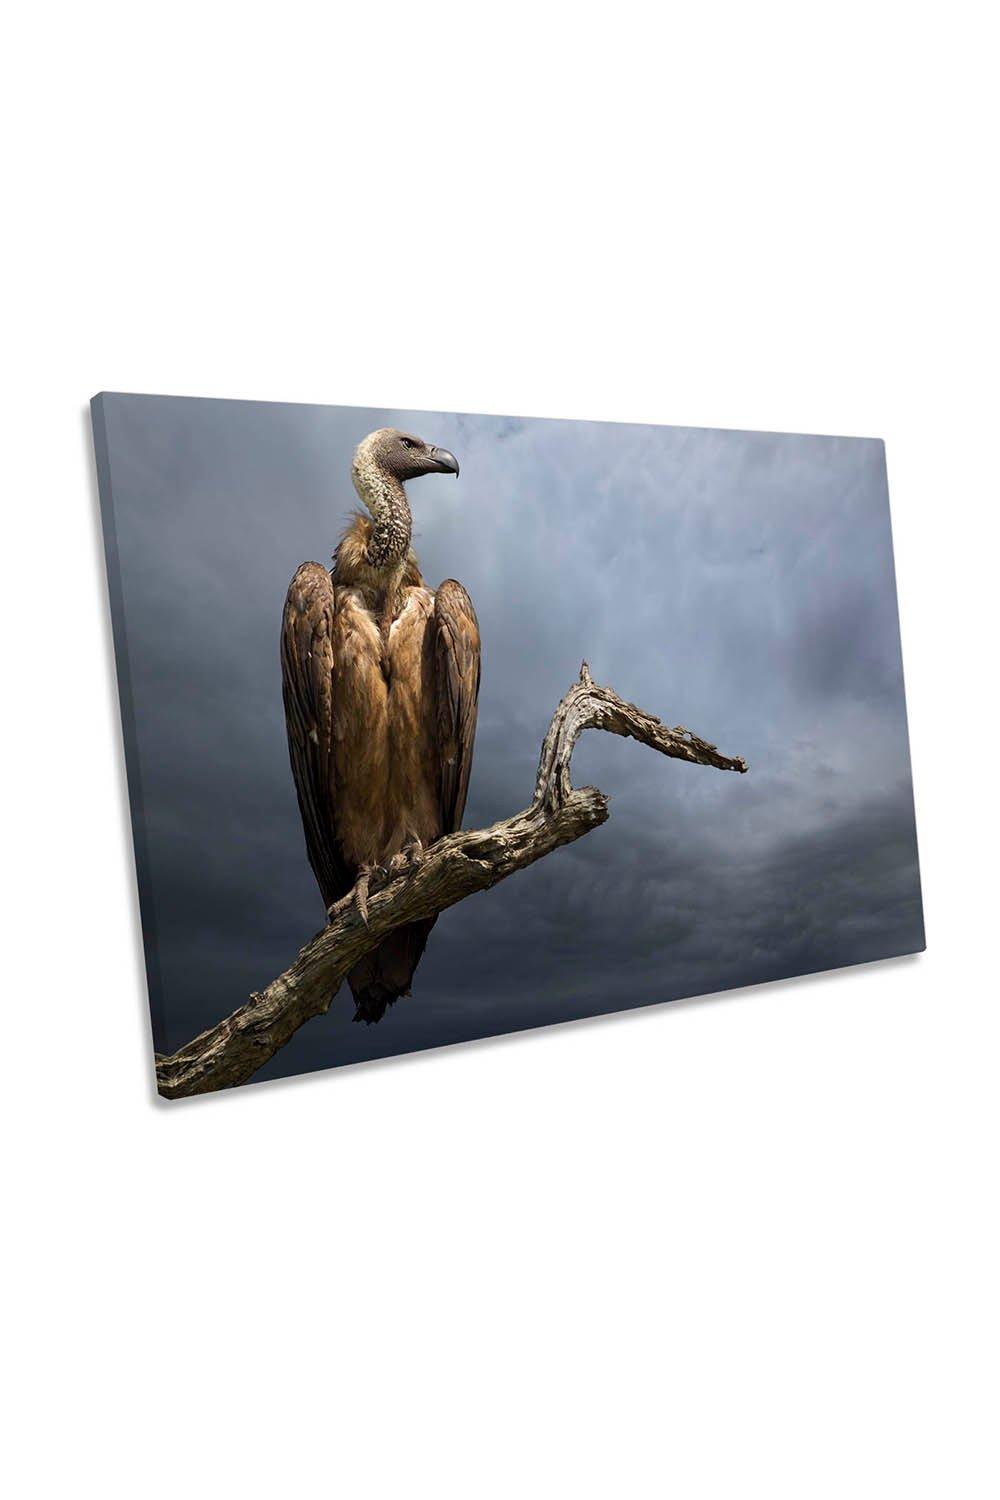 The Vulture Bird Canvas Wall Art Picture Print